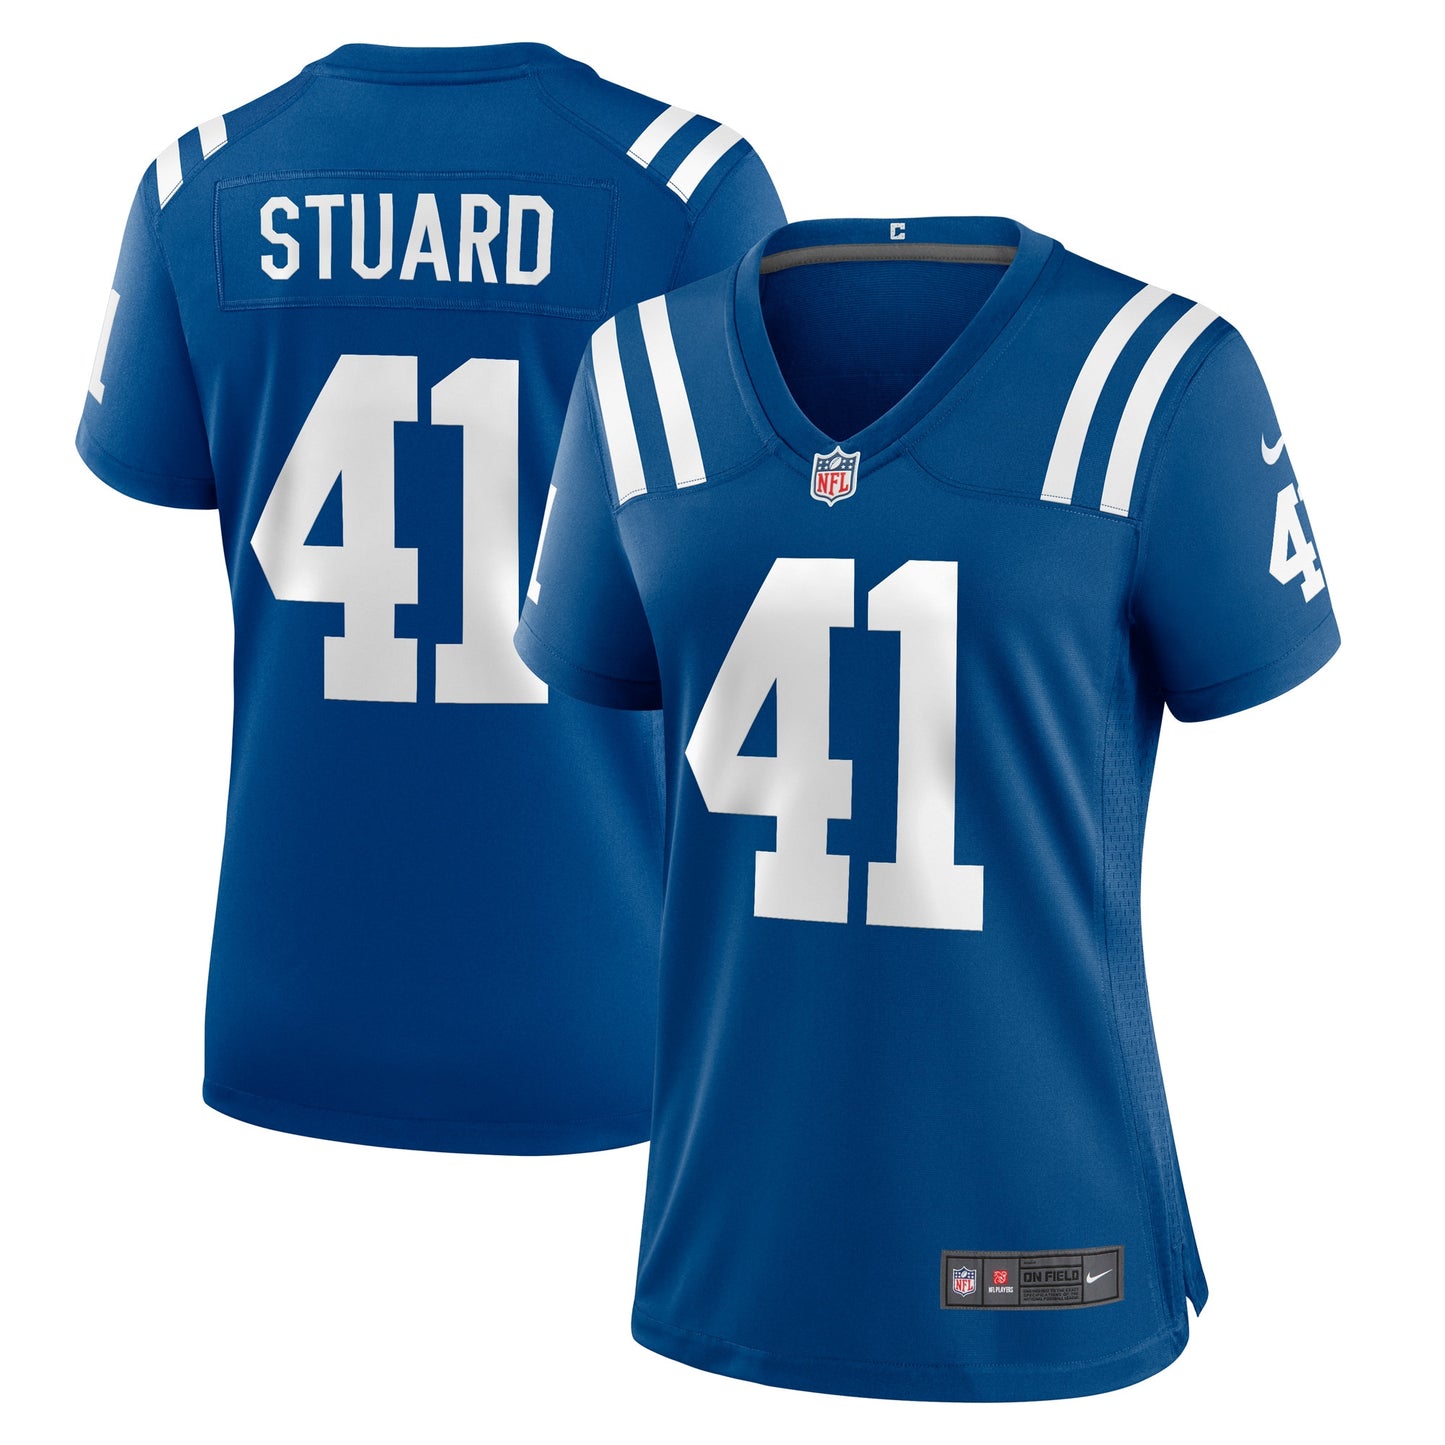 Grant Stuard Indianapolis Colts Nike Women's Game Player Jersey - Royal